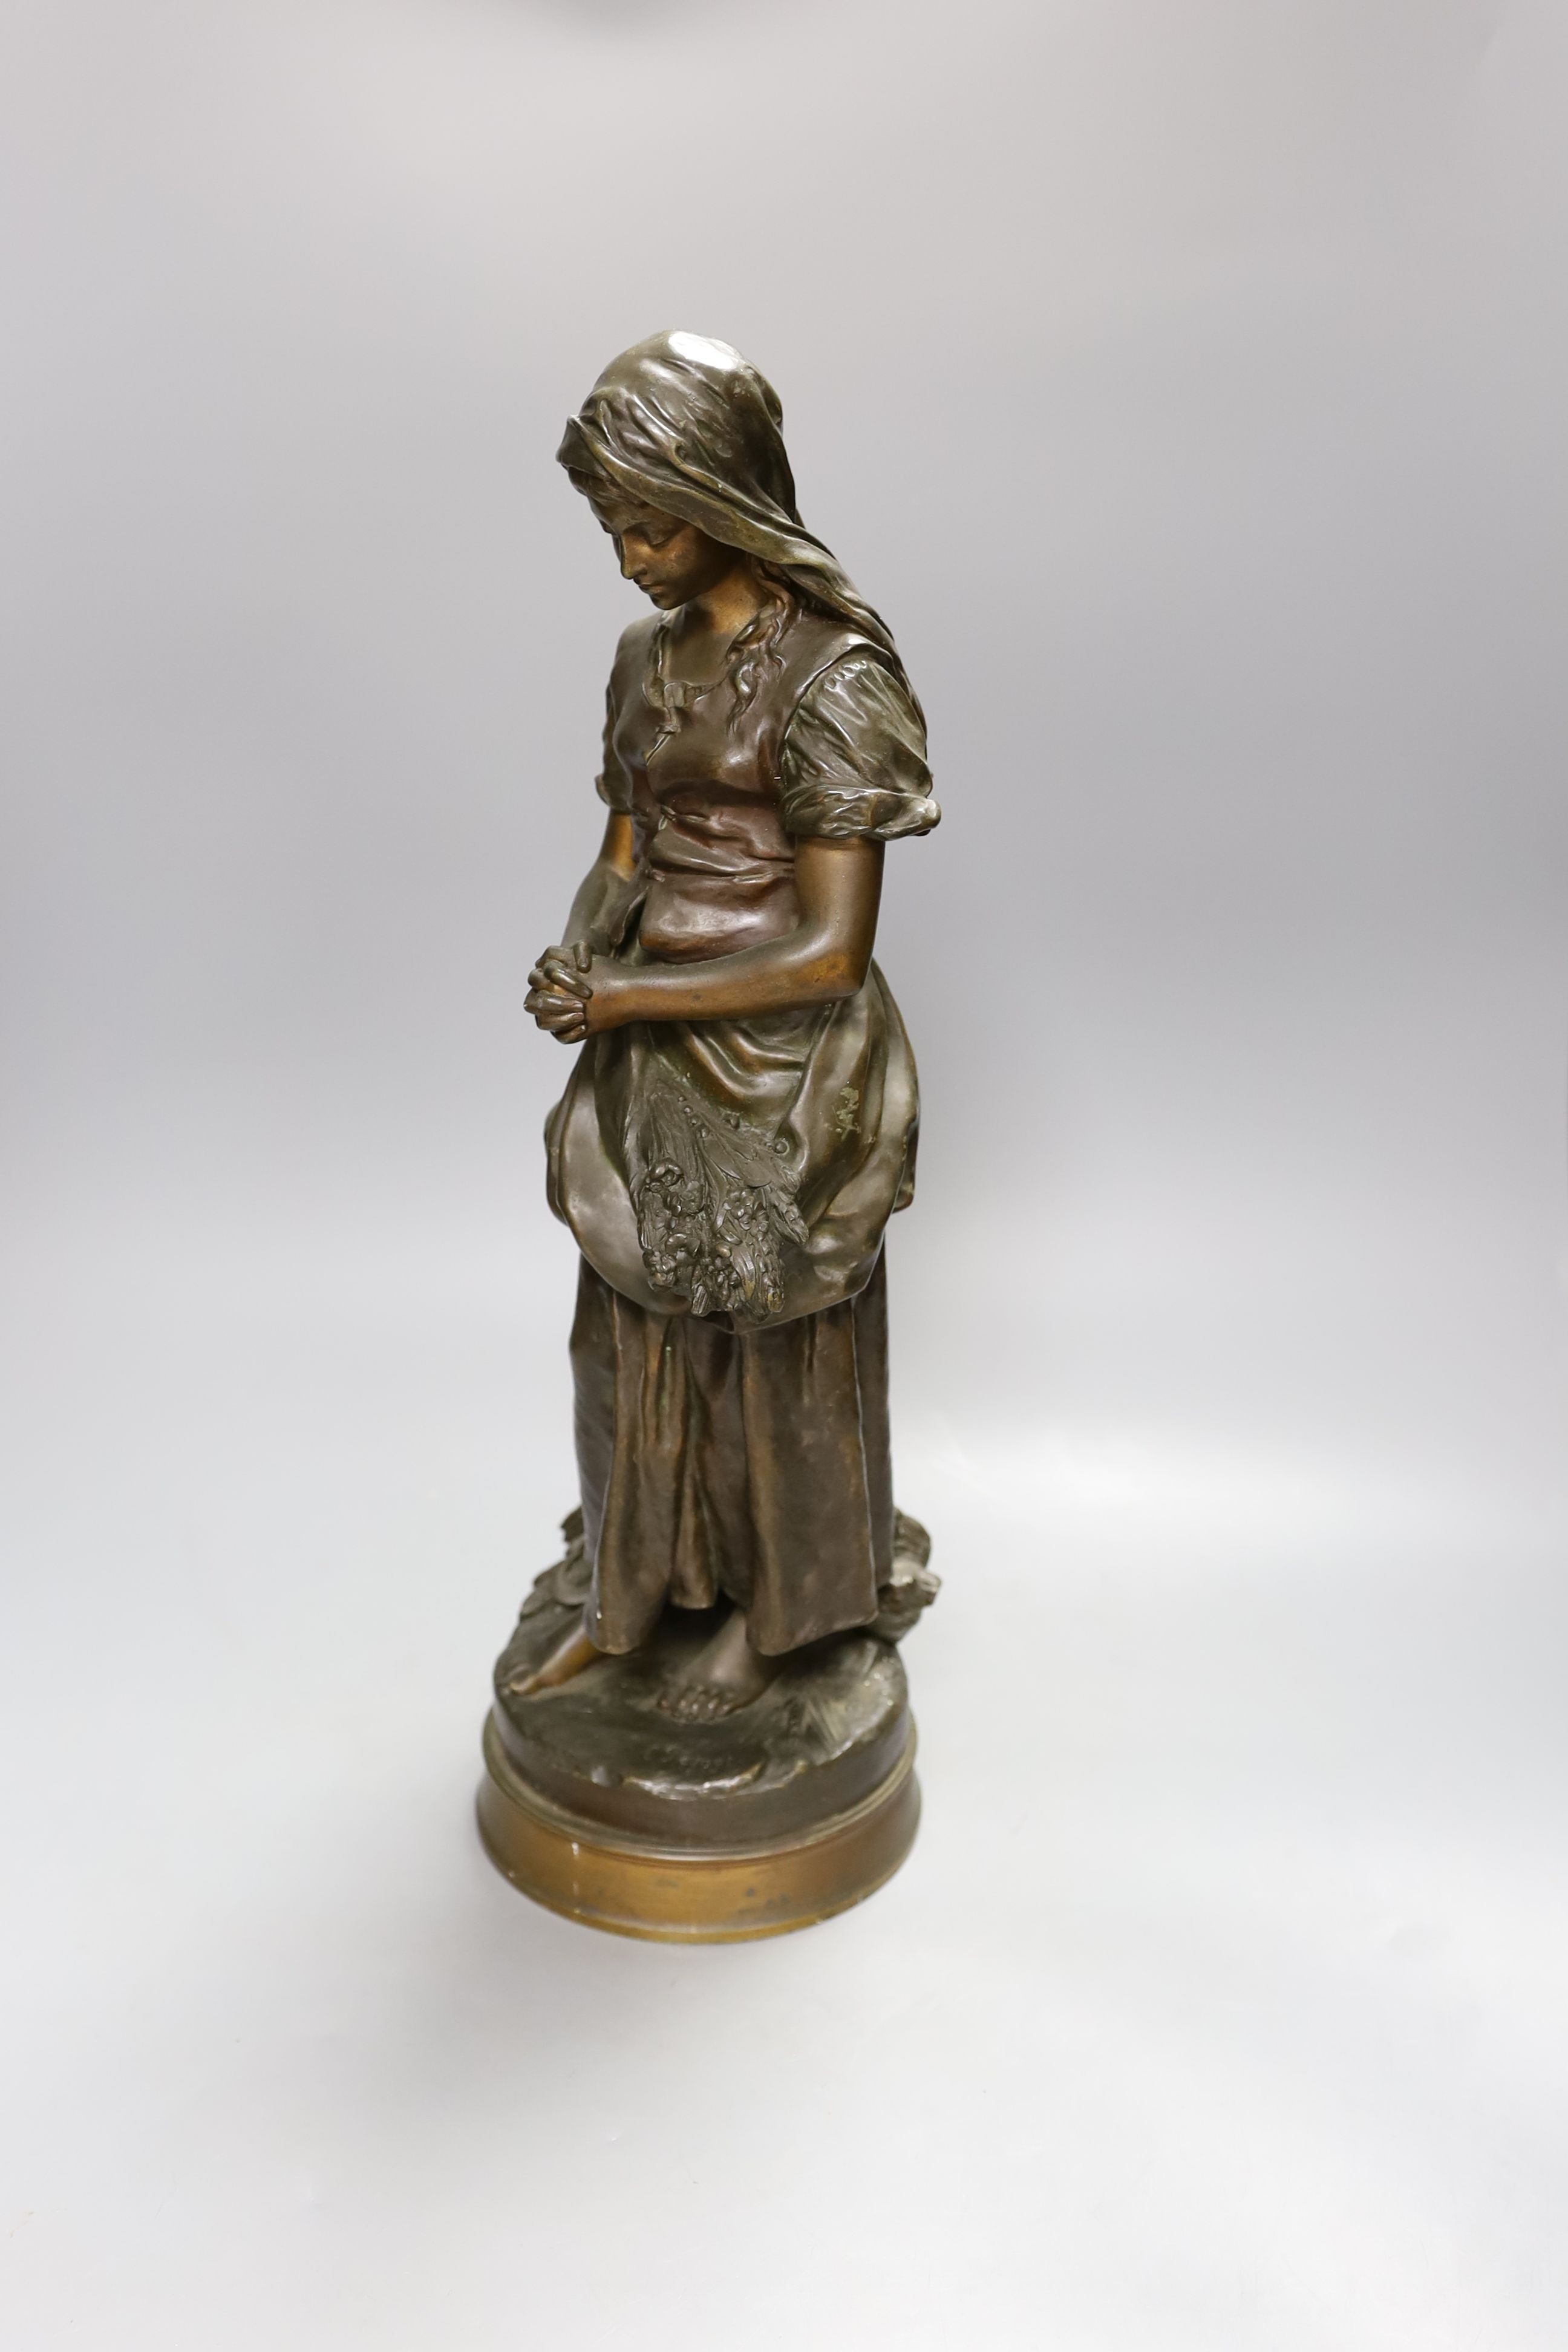 Emile Edmond Peynot (1850-1932), bronze of a girl with flowers in her apron 46cm